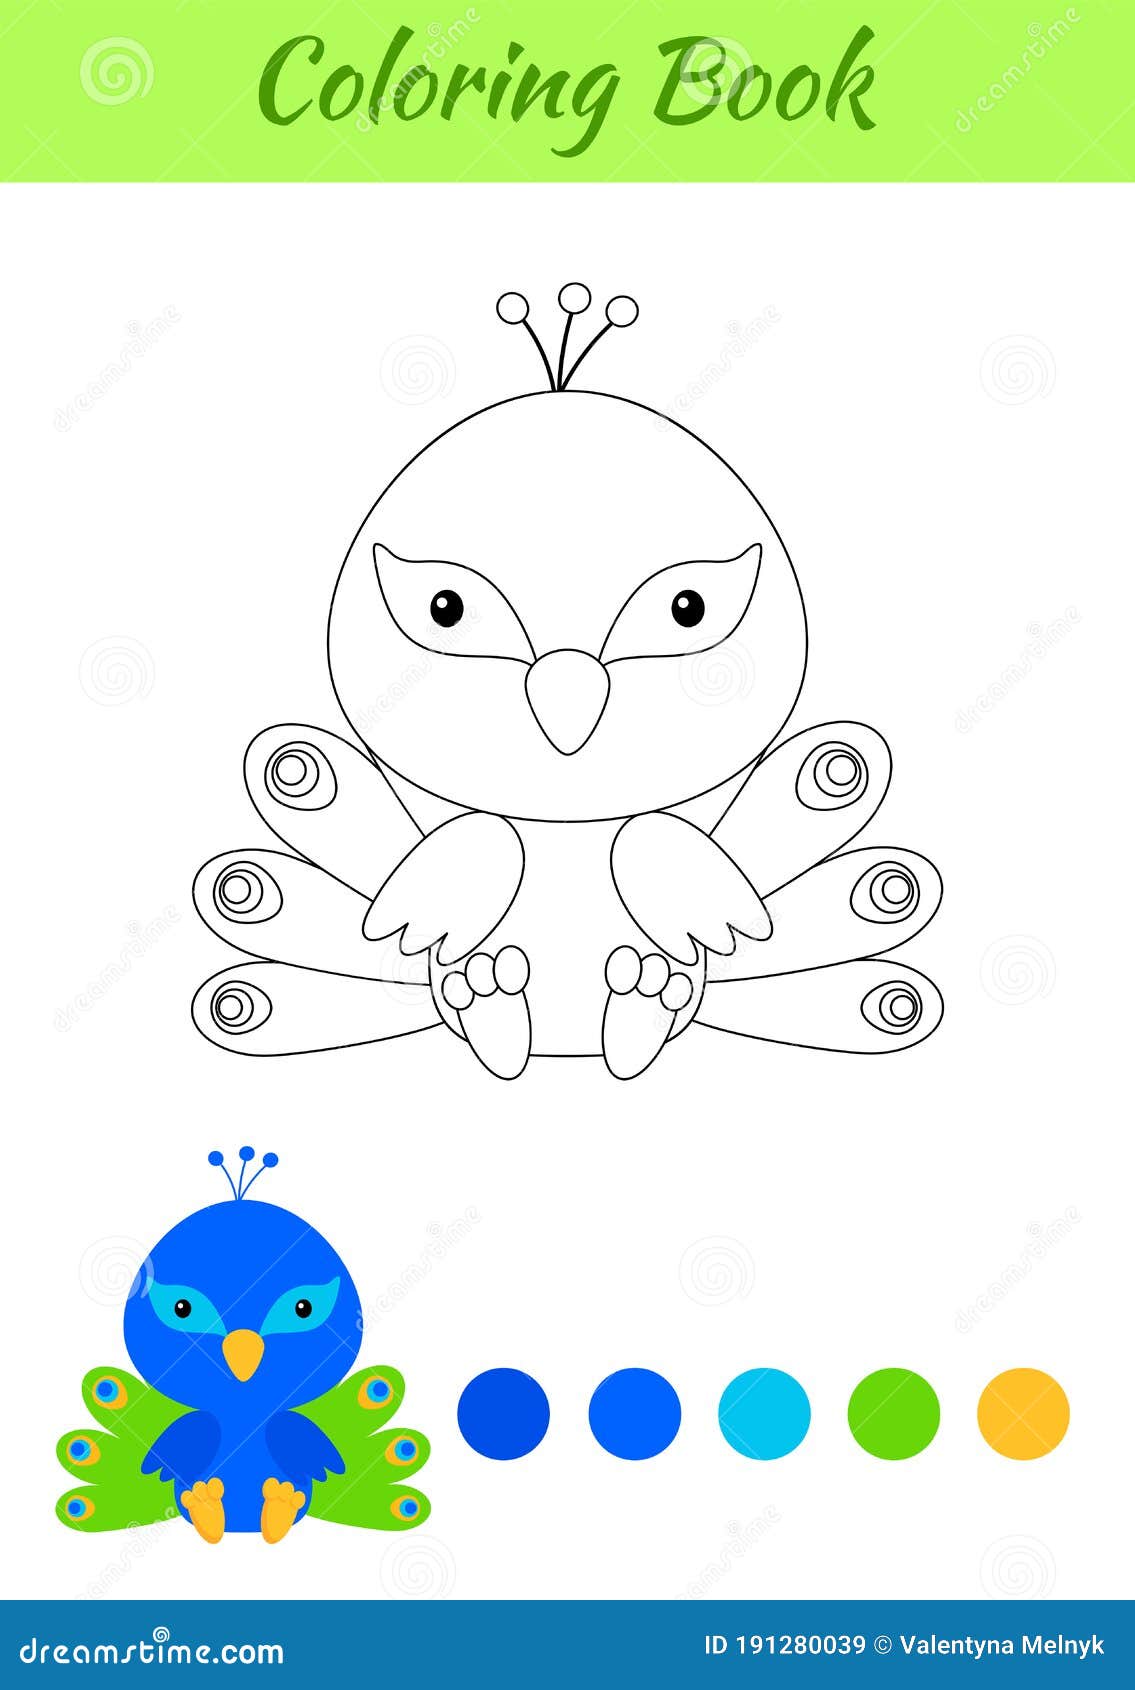 Coloring Page Little Sitting Baby Peacock Coloring Book For Kids Educational Activity For Preschool Years Kids And Toddlers With Stock Vector Illustration Of Coloring Cartoon 191280039